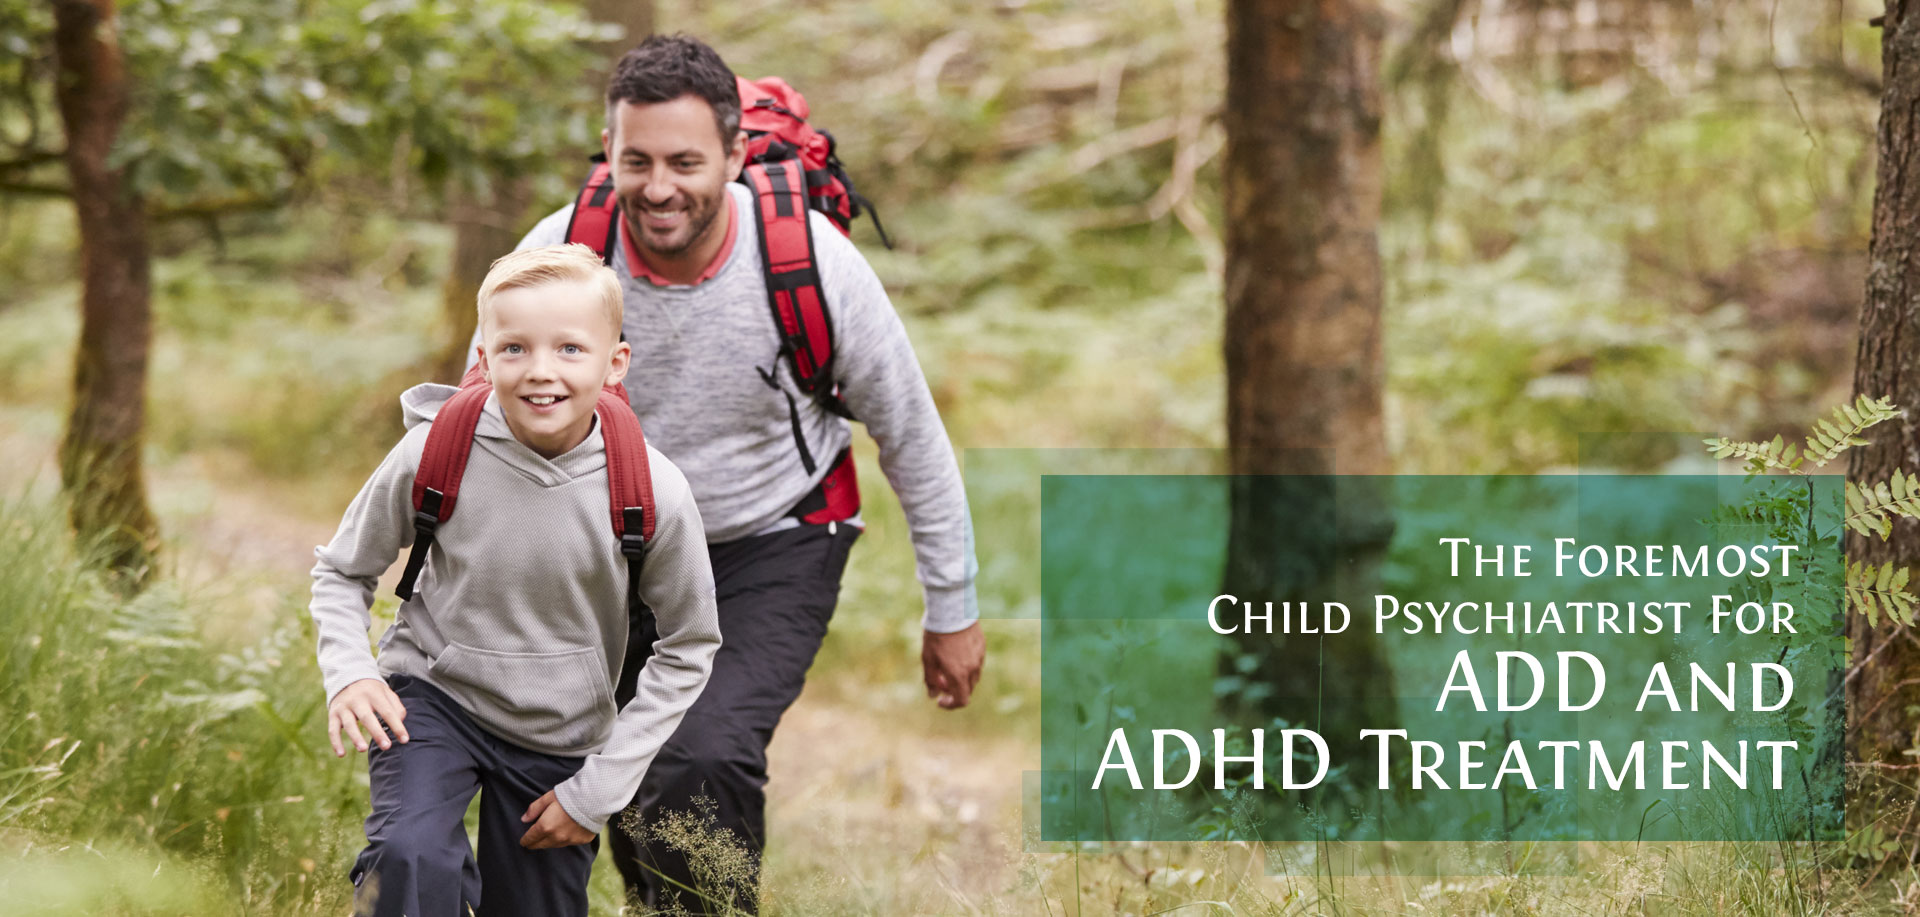 father and son with text The Foremost Child Psychiatrist for ADD and ADHD Treatment